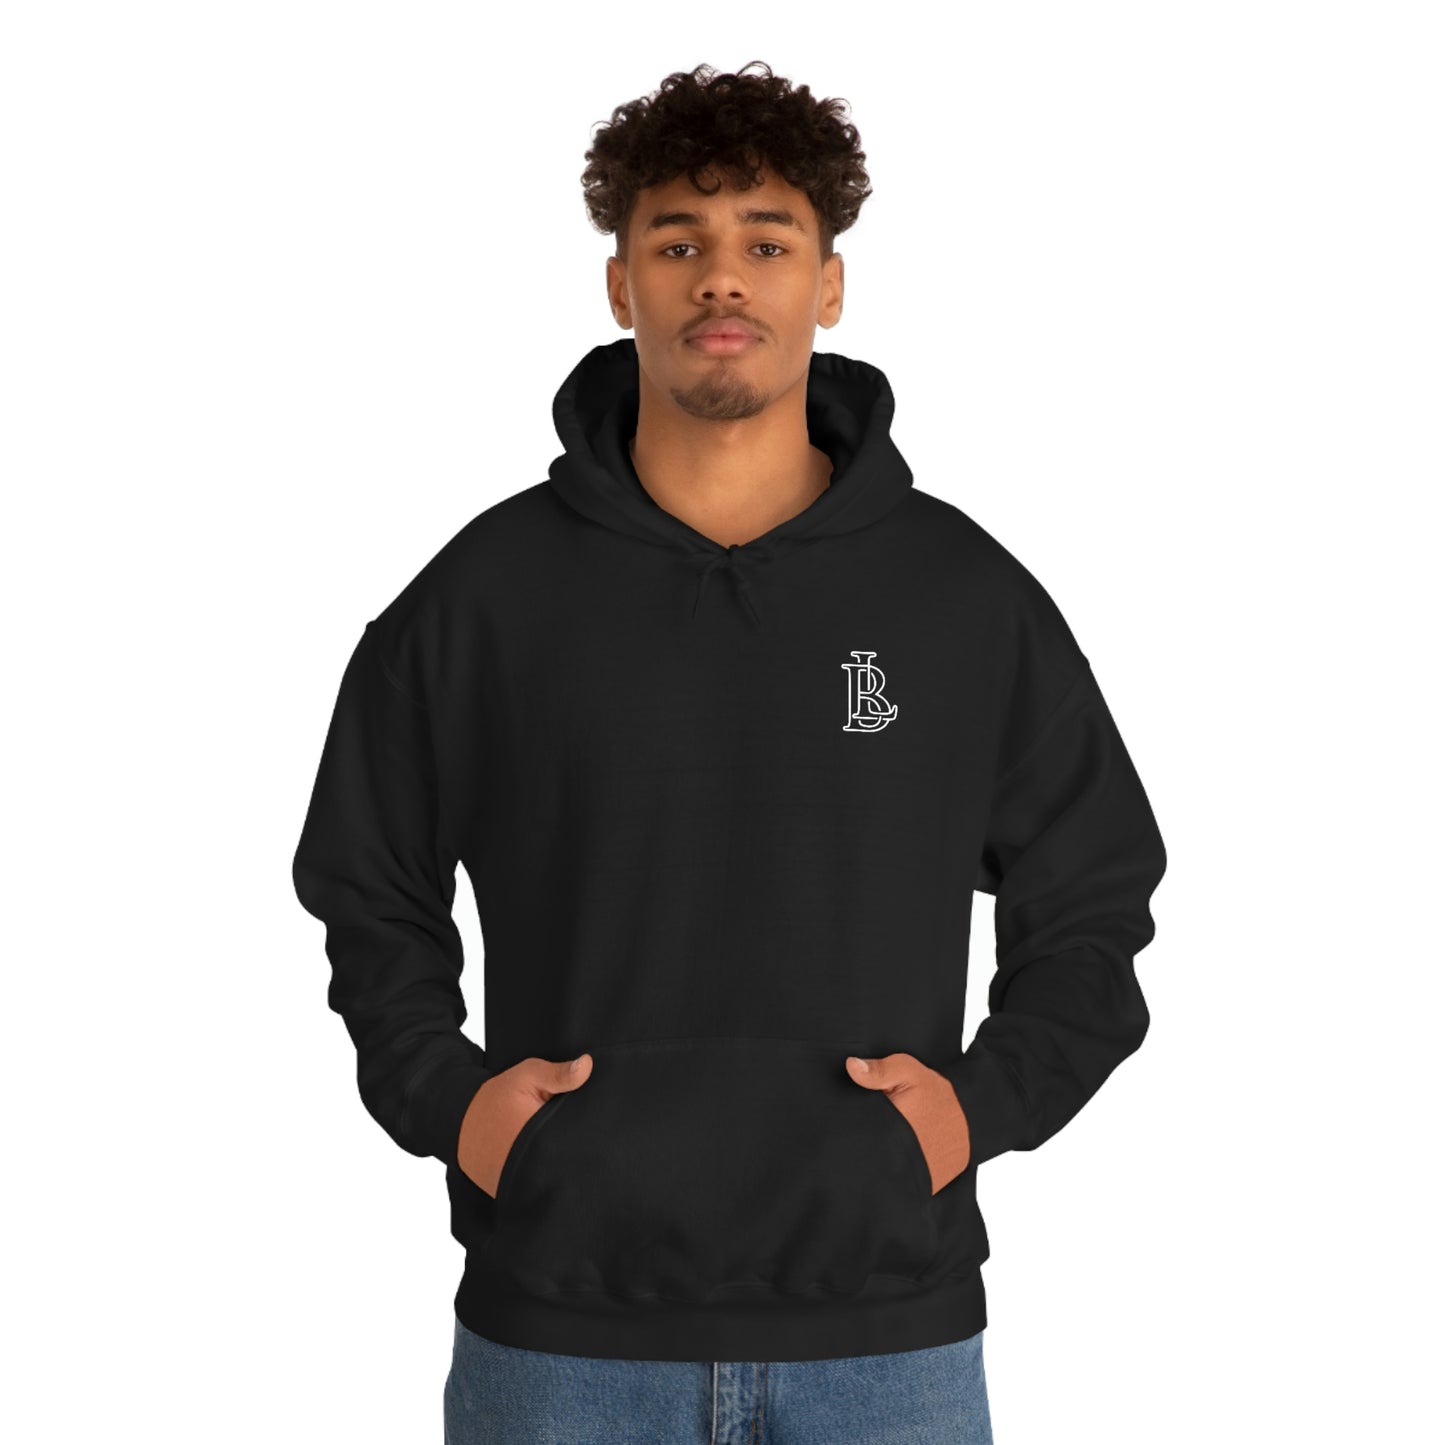 LAVONTA BENTLEY DOUBLE-SIDED HOODIE